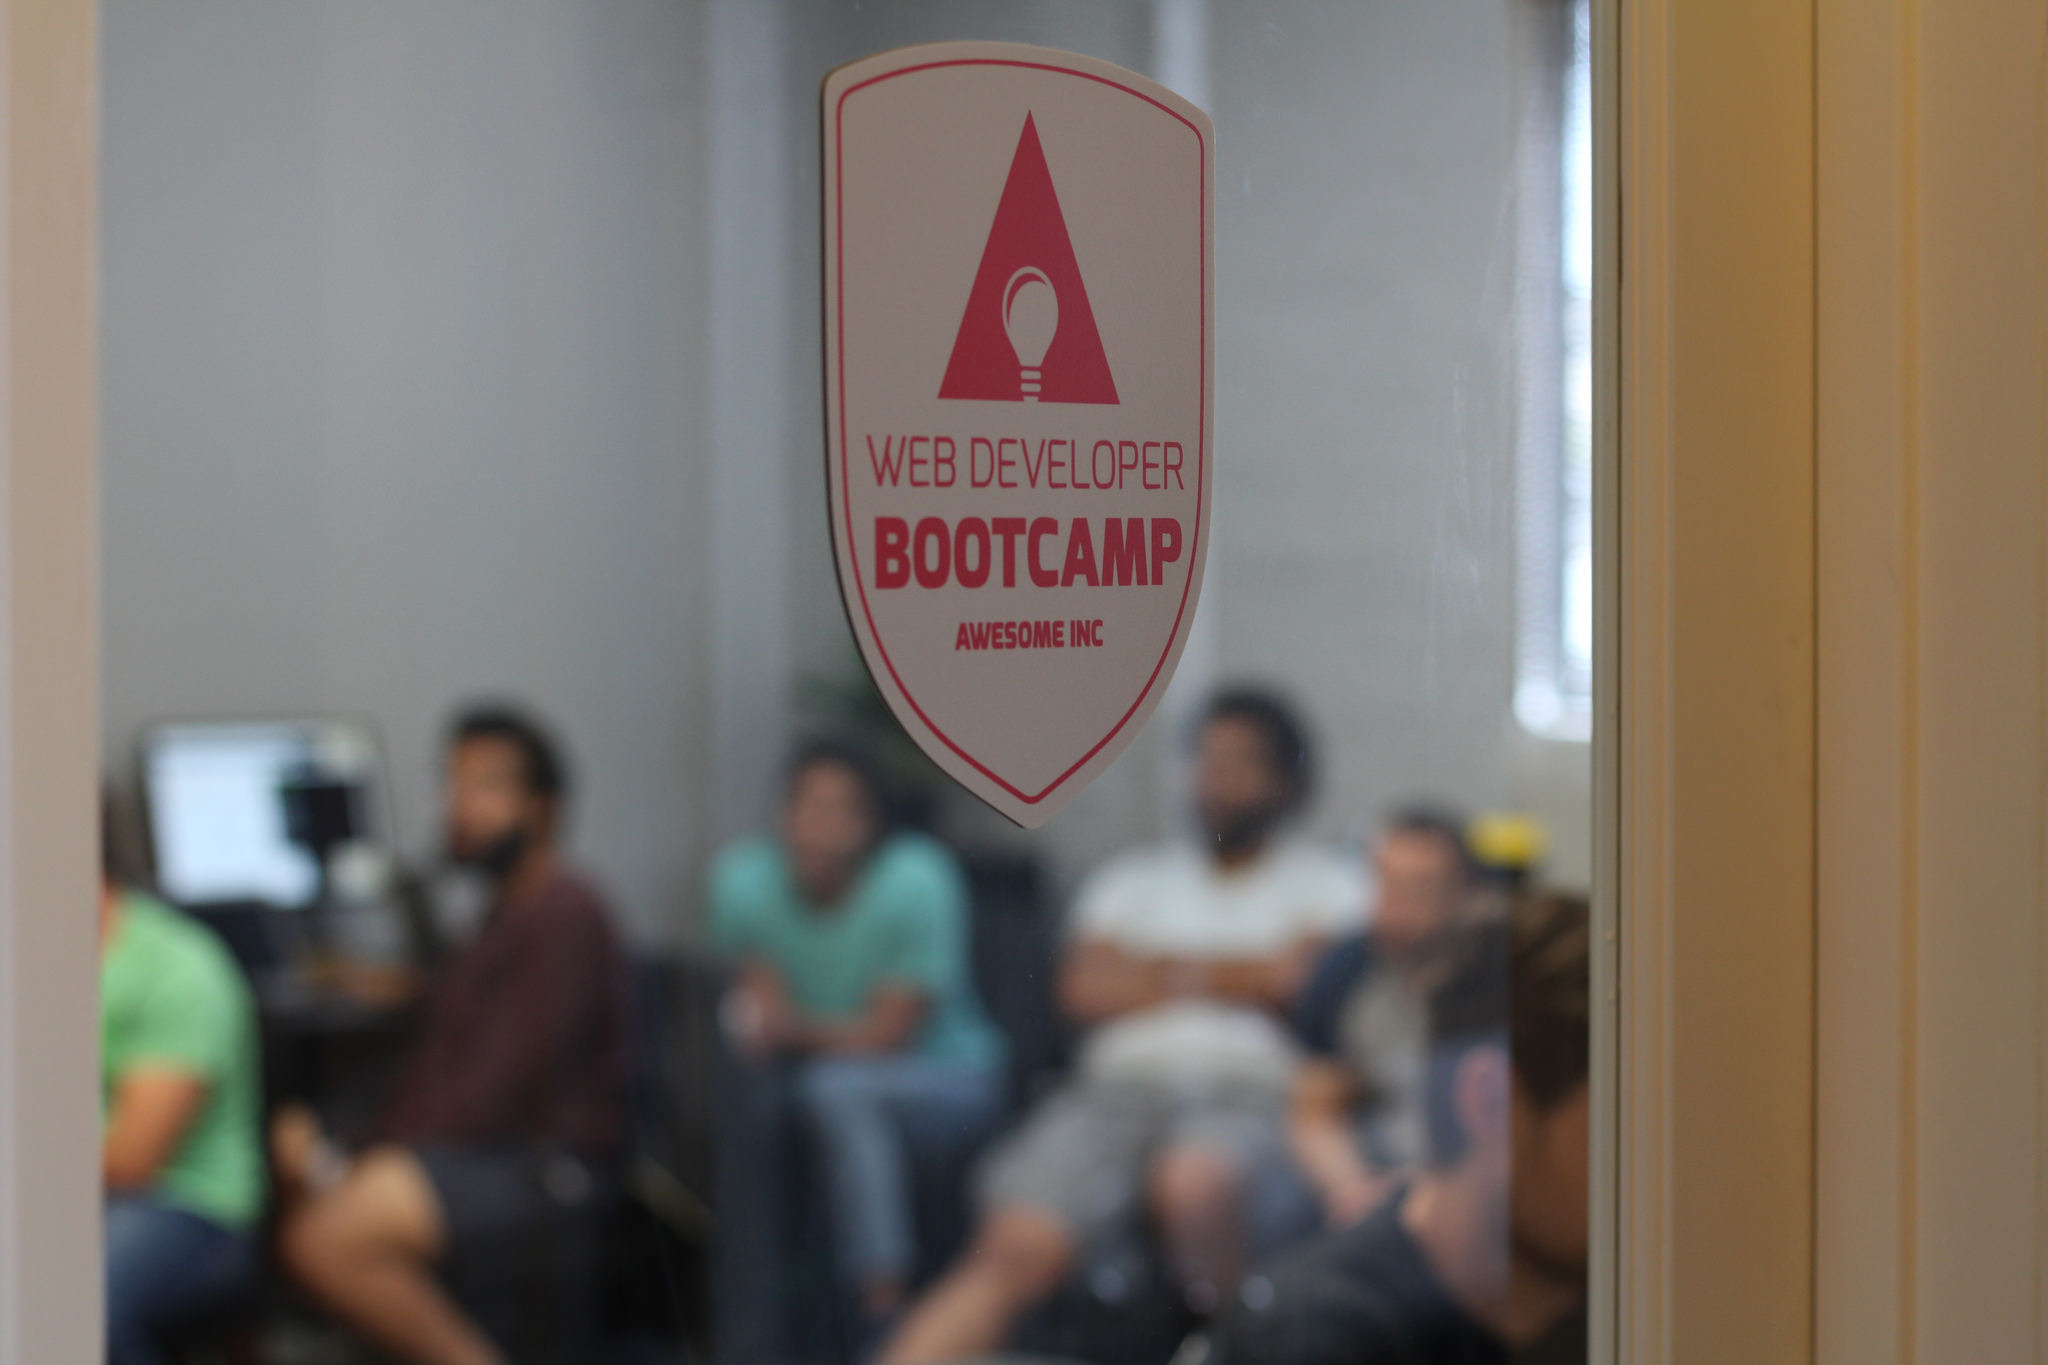 Awesome Inc Bootcamp classroom doorway